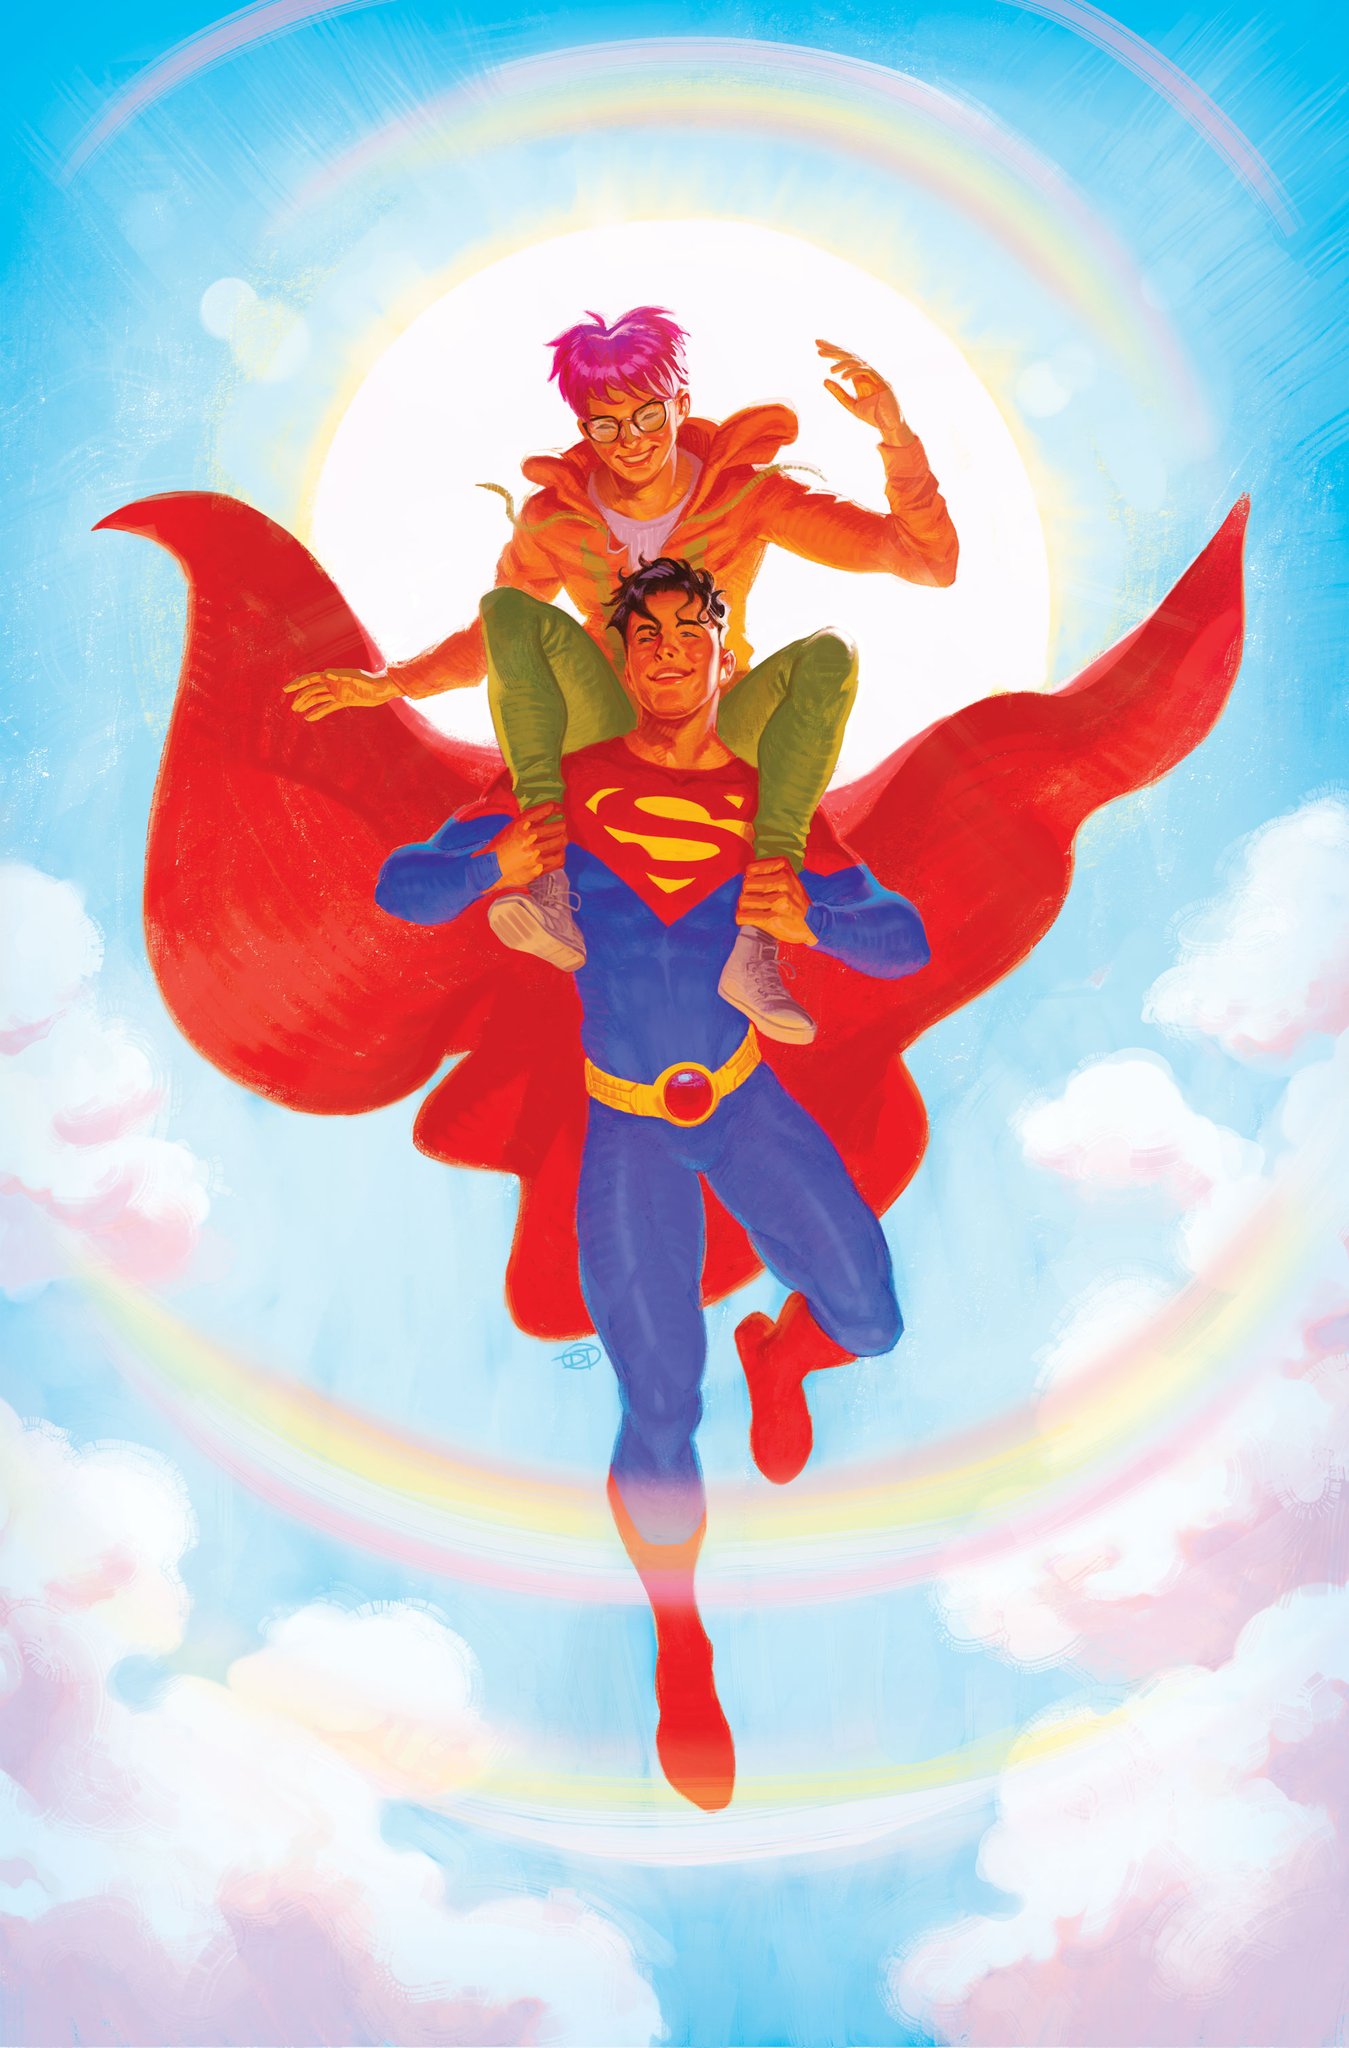 Tom Taylor on X: Jon Kent and Jay Nakamura soar together on the variant  cover to #Superman: Son of Kal-El #12. Art by @DavidTalaski for #DCPride🌈   / X